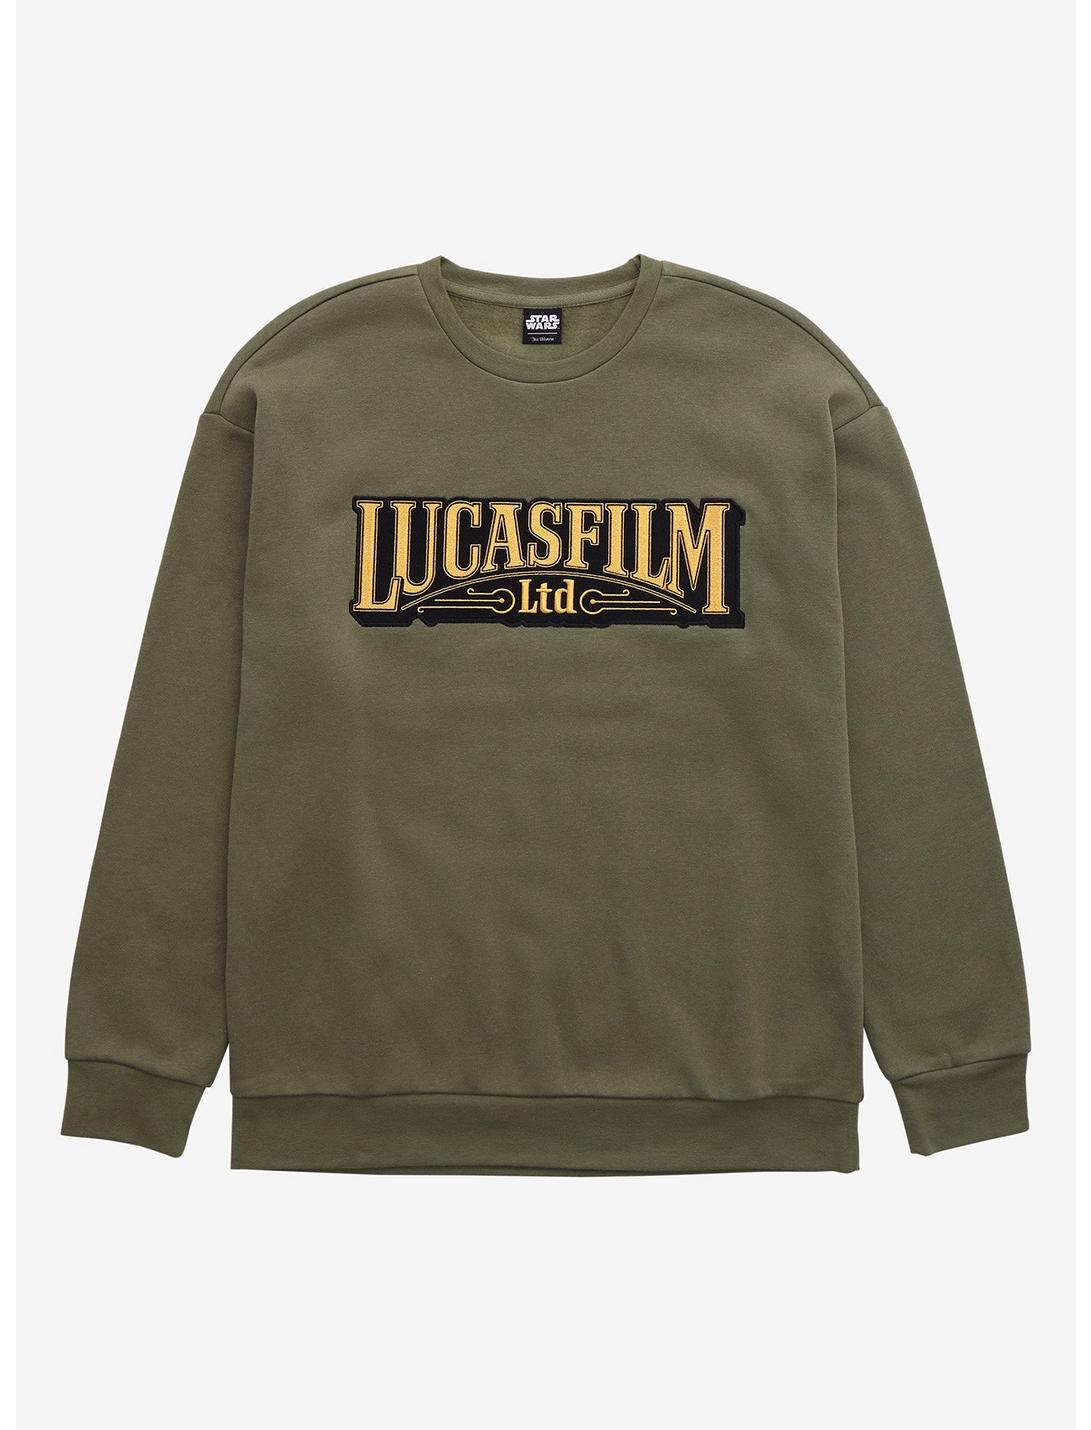 Our Universe Lucasfilm 50th Anniversary Crewneck - BoxLunch Exclusive, OLIVE, hi-res